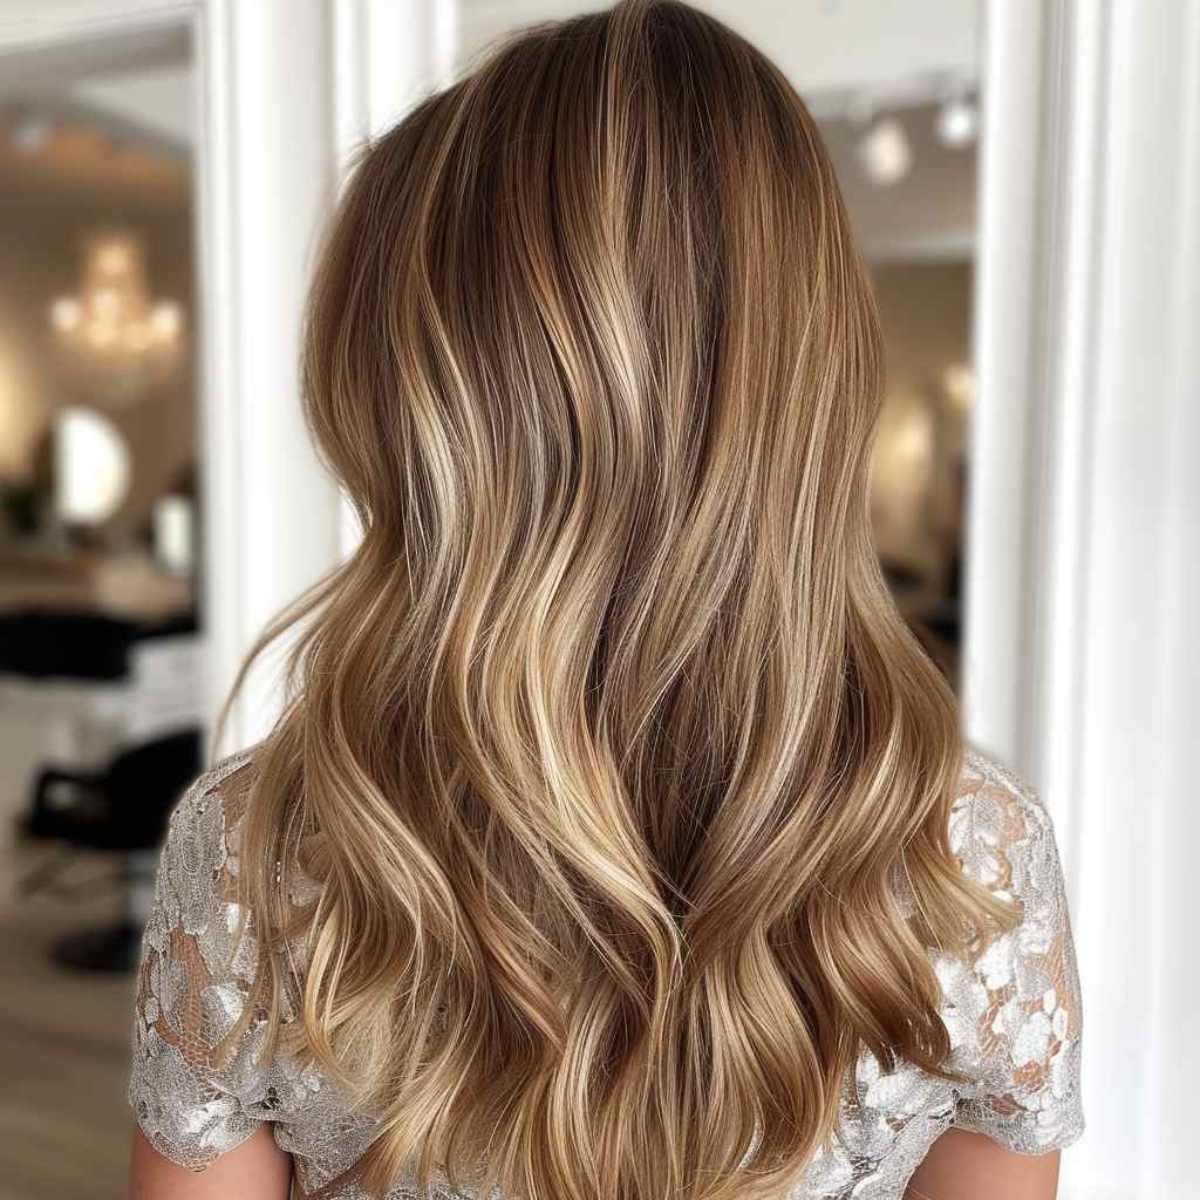 Cool Light Brown and Deep Blonde Hair Color